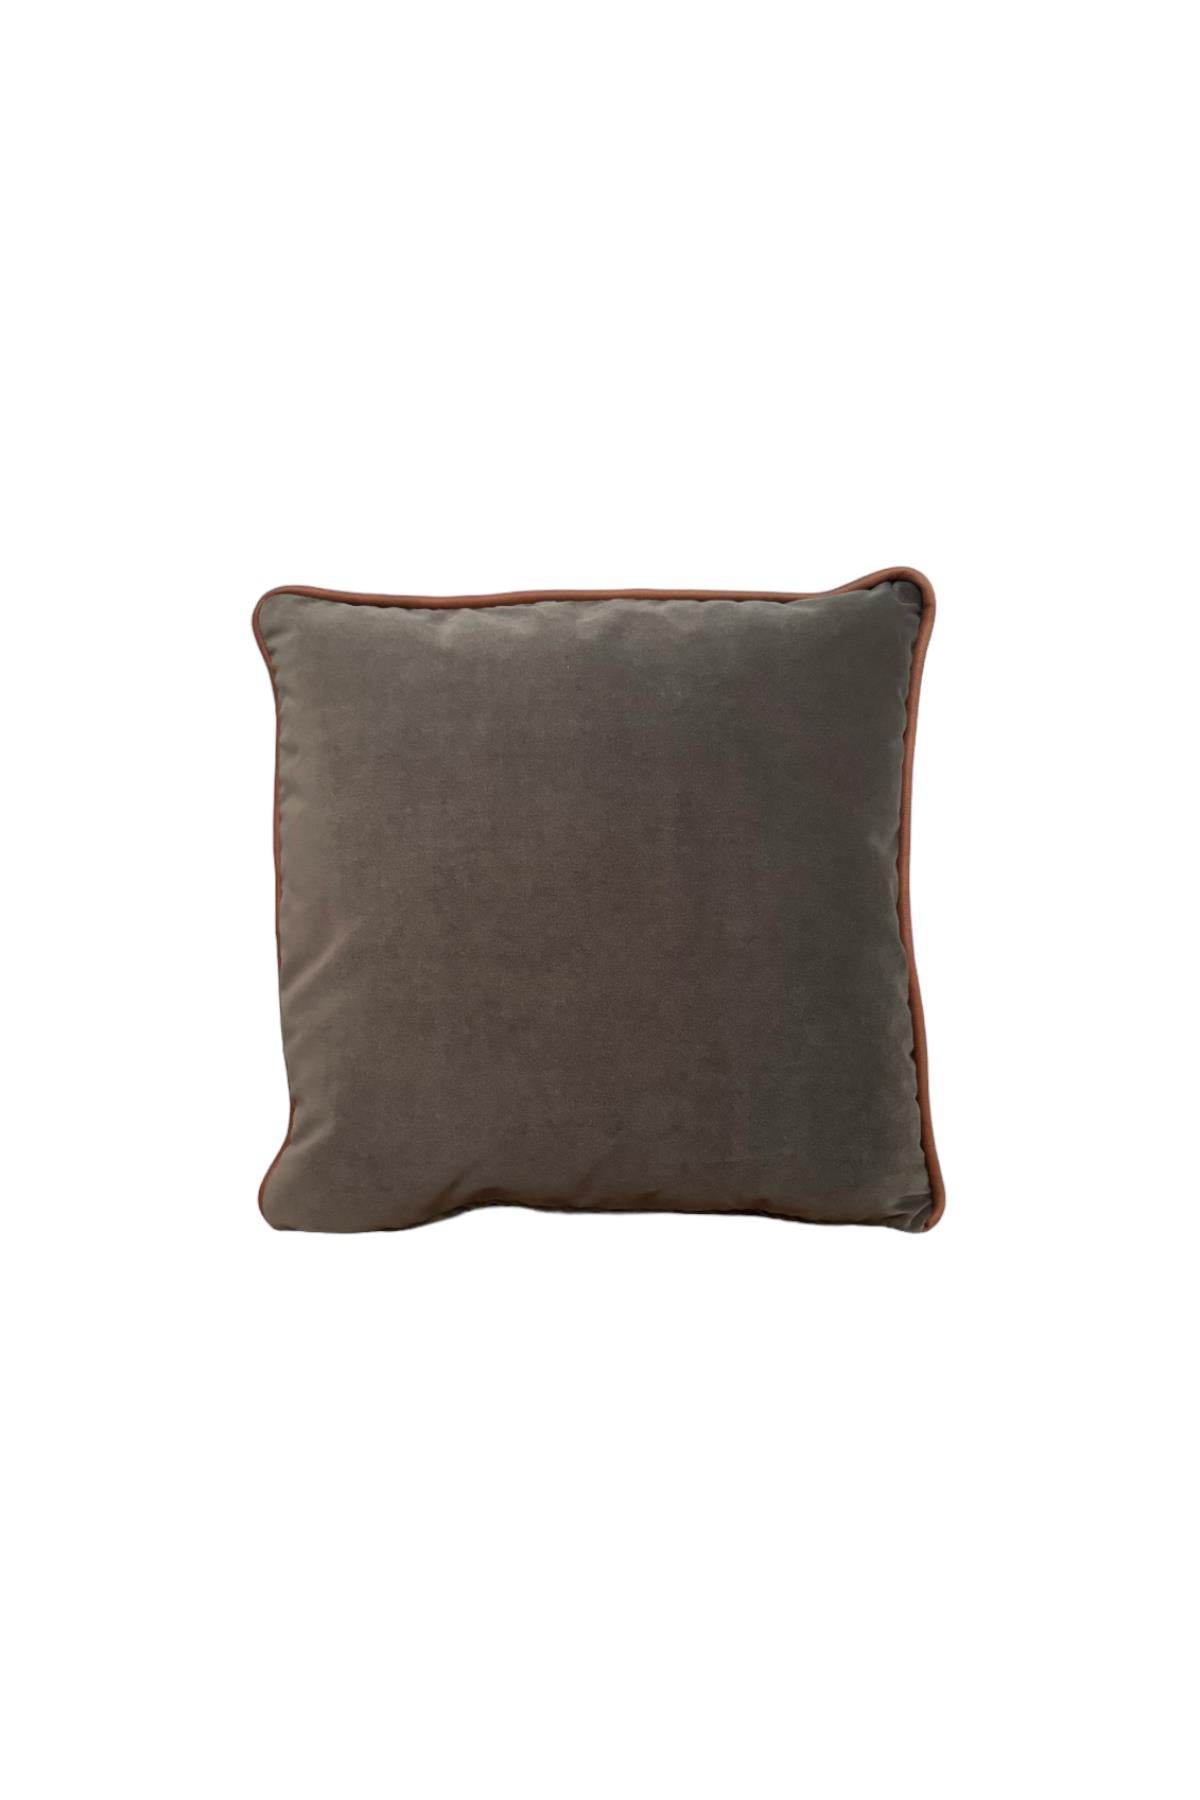 Green Velvet Throw Pillow with Brown Piping